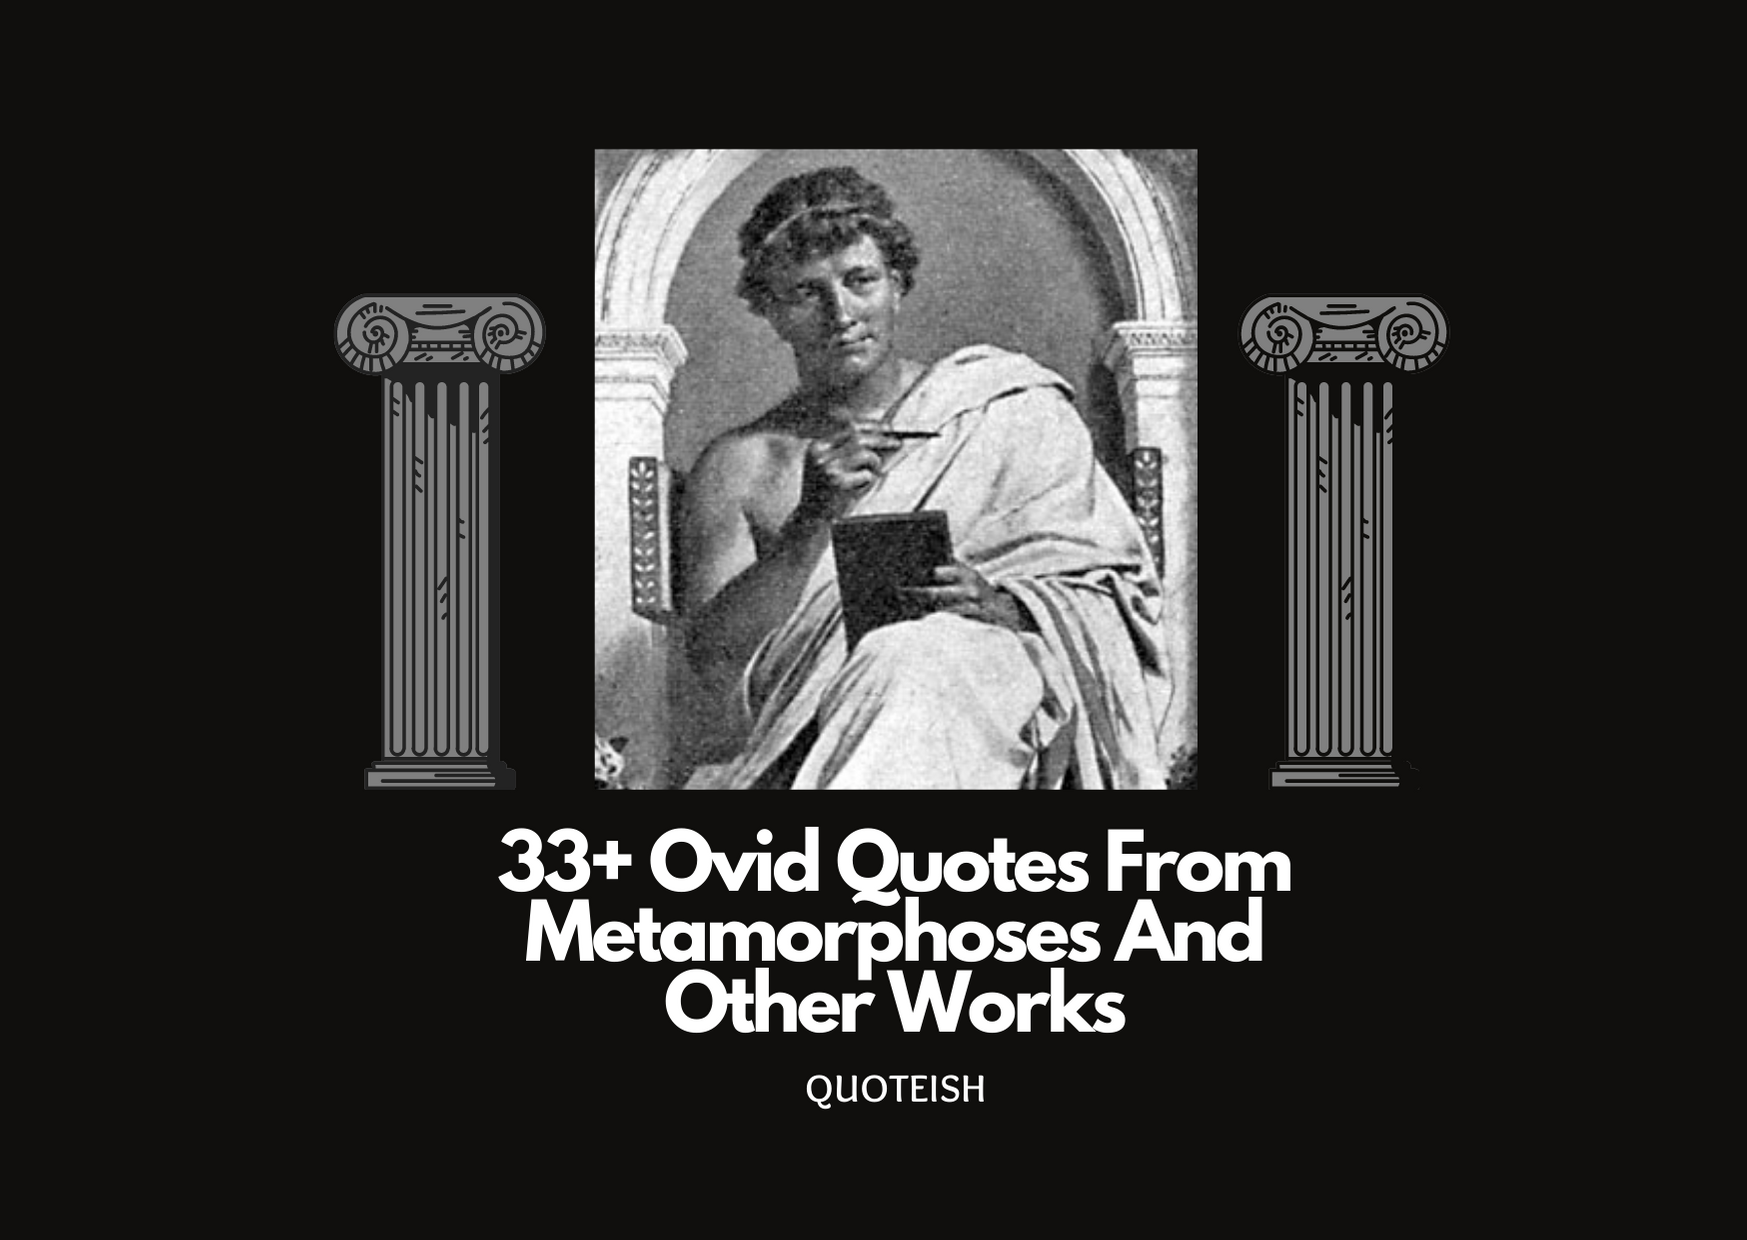 33+ Ovid Quotes From Metamorphoses And Other Works QUOTEISH